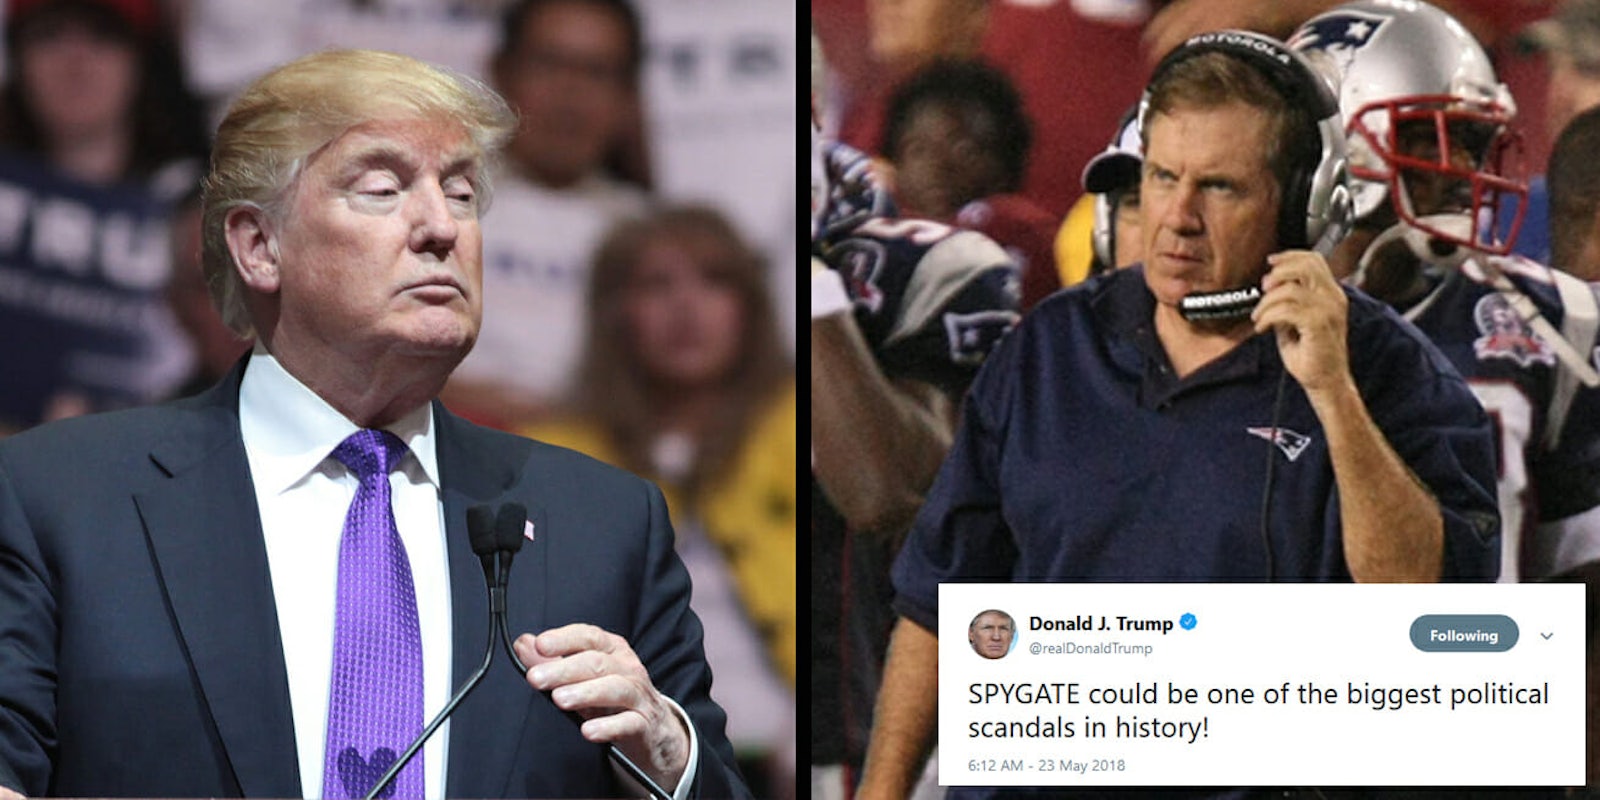 President Donald Trump called what he perceives as a scandal involving a 'spy' in his presidential campaign 'SPYGATE' on Wednesday, but Twitter quickly pointed out that nickname was taken by the NFL in 2007.